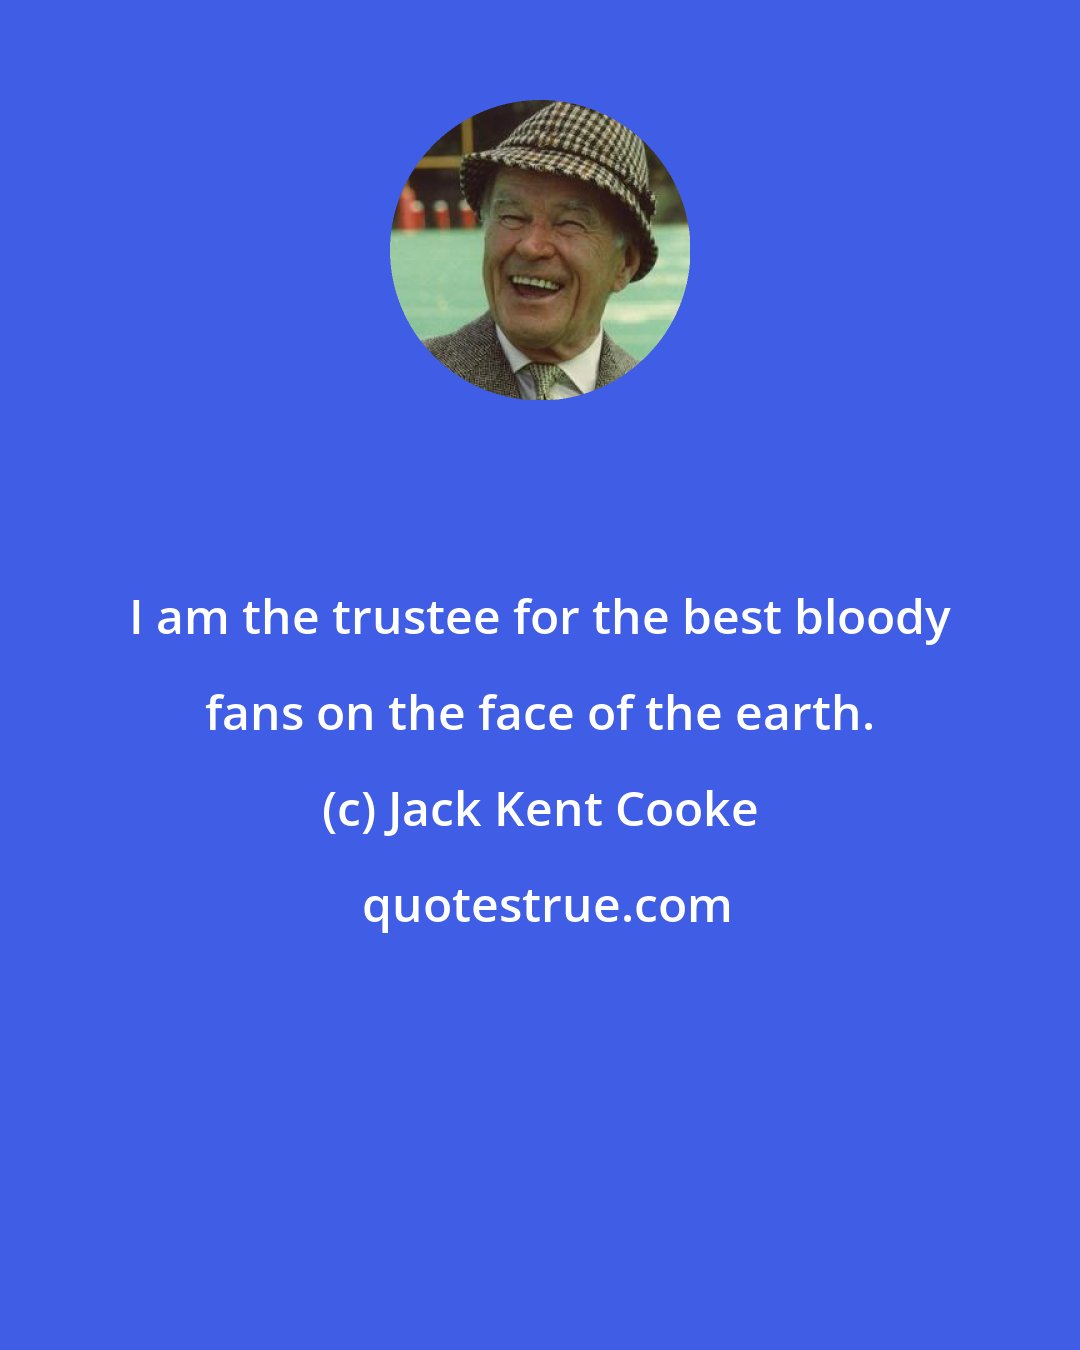 Jack Kent Cooke: I am the trustee for the best bloody fans on the face of the earth.